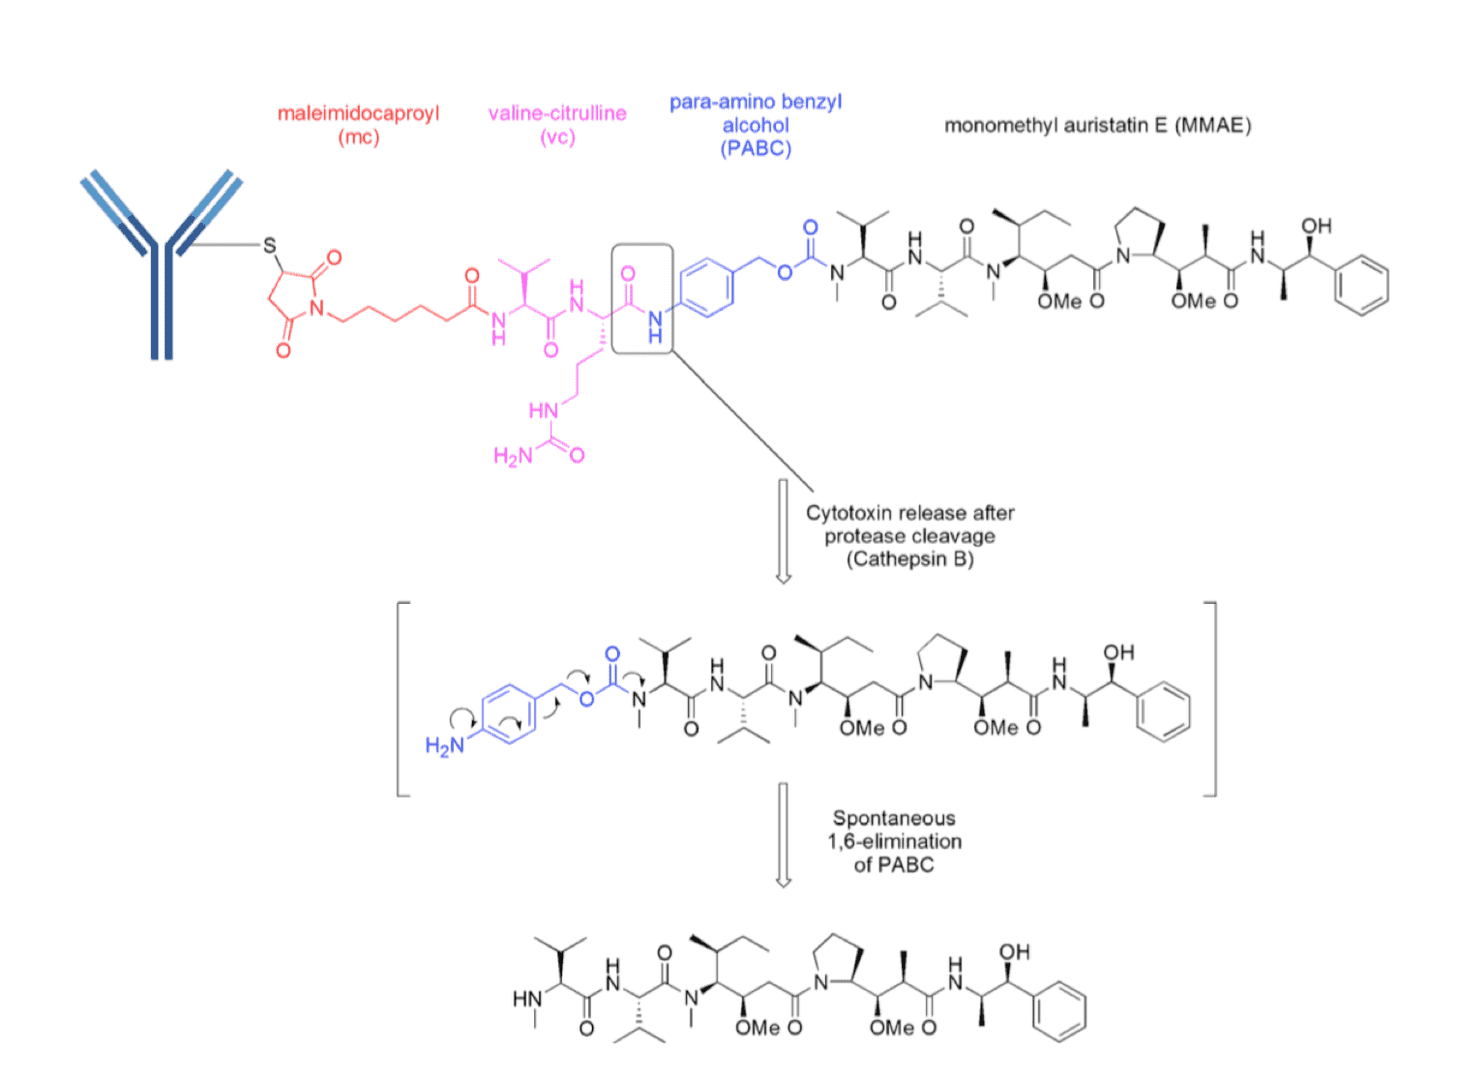  Schematic representation  of an ADC with a enzymatically cleavable vc dipeptide linker. MMAE is attached  to a protease recognition sequence valine-citrulline (vc) via a para-amino  benzyl alcohol self-immolative moiety to ensure the release of MMAE in its  “native” form (Pharm. Res., 2015).